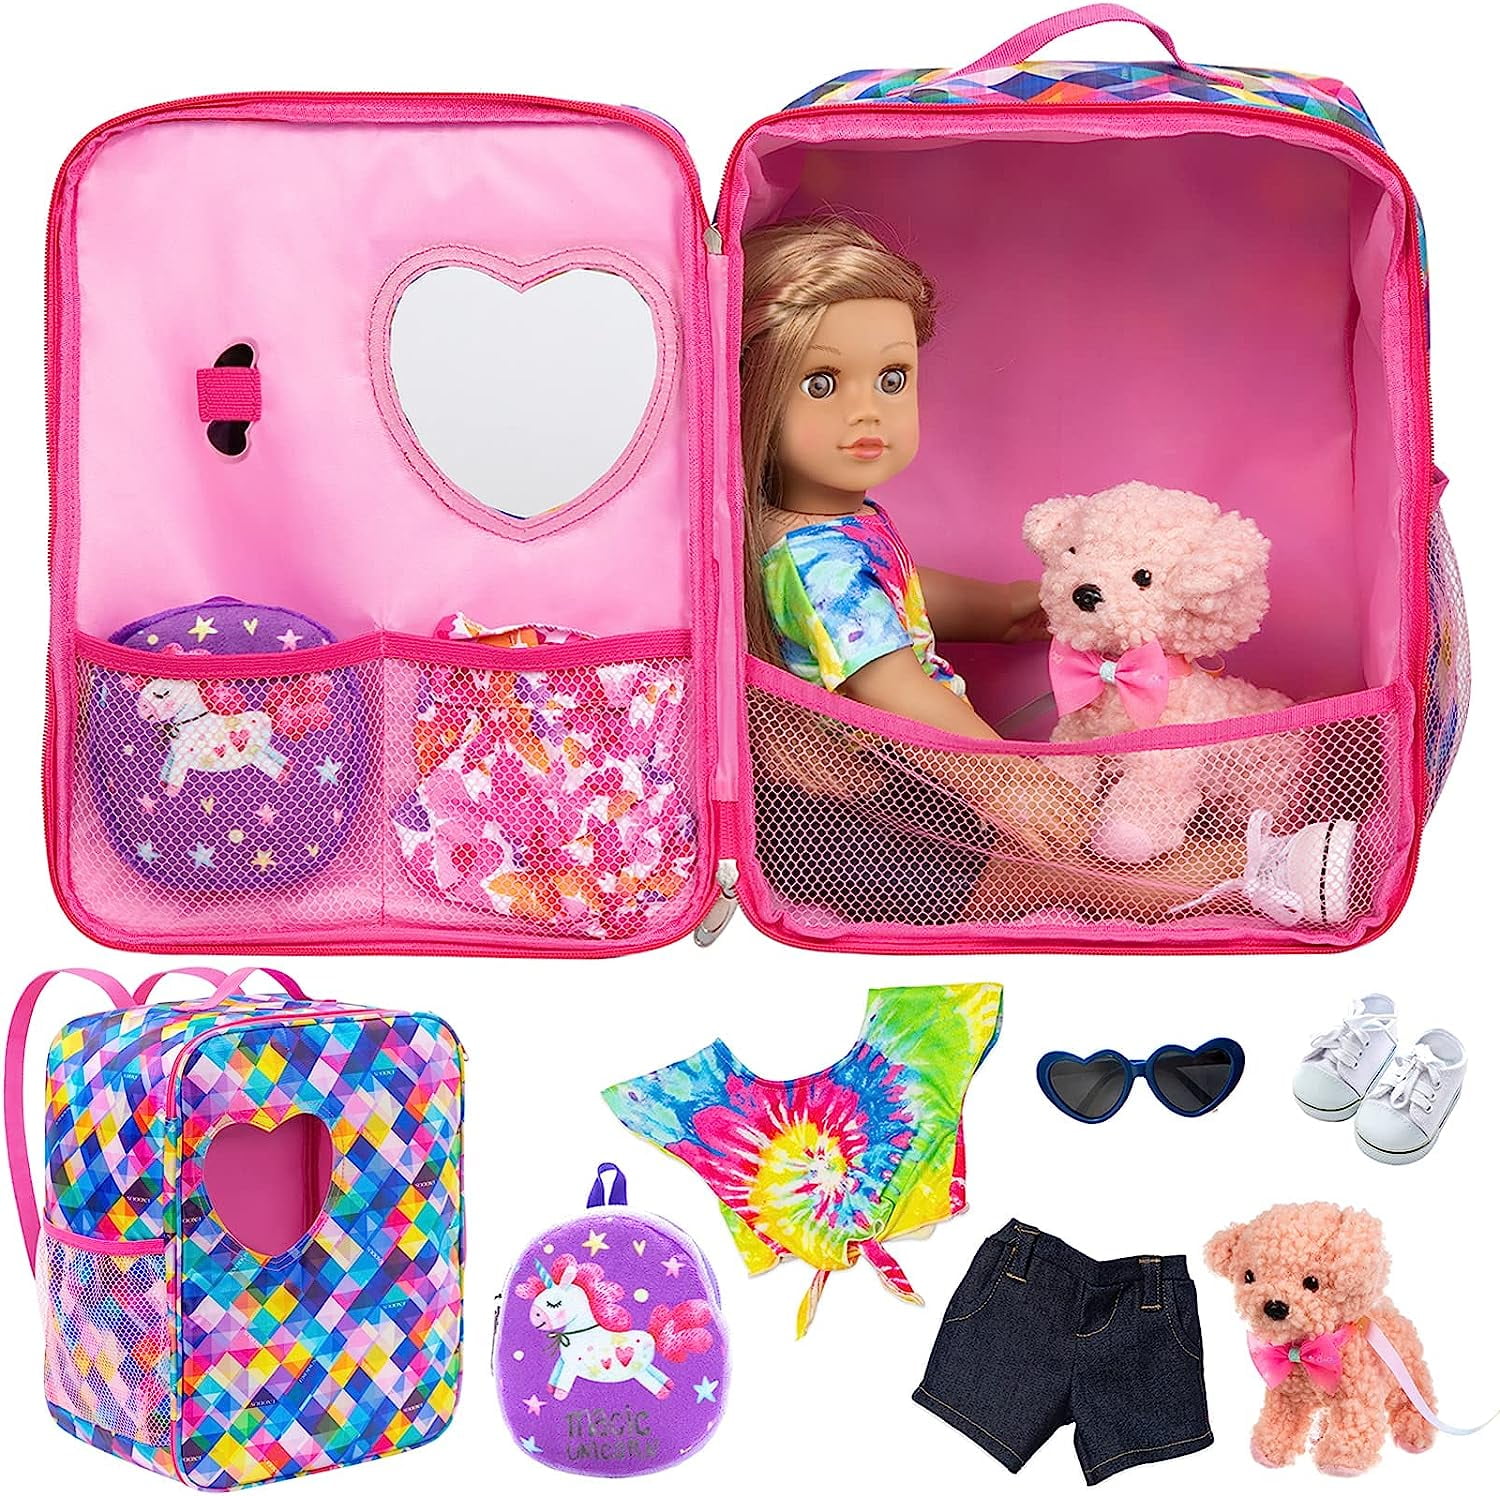 American Girl Doll 18 Inch Accessories  American Girl Toy Accessories - 18  Inch - Aliexpress